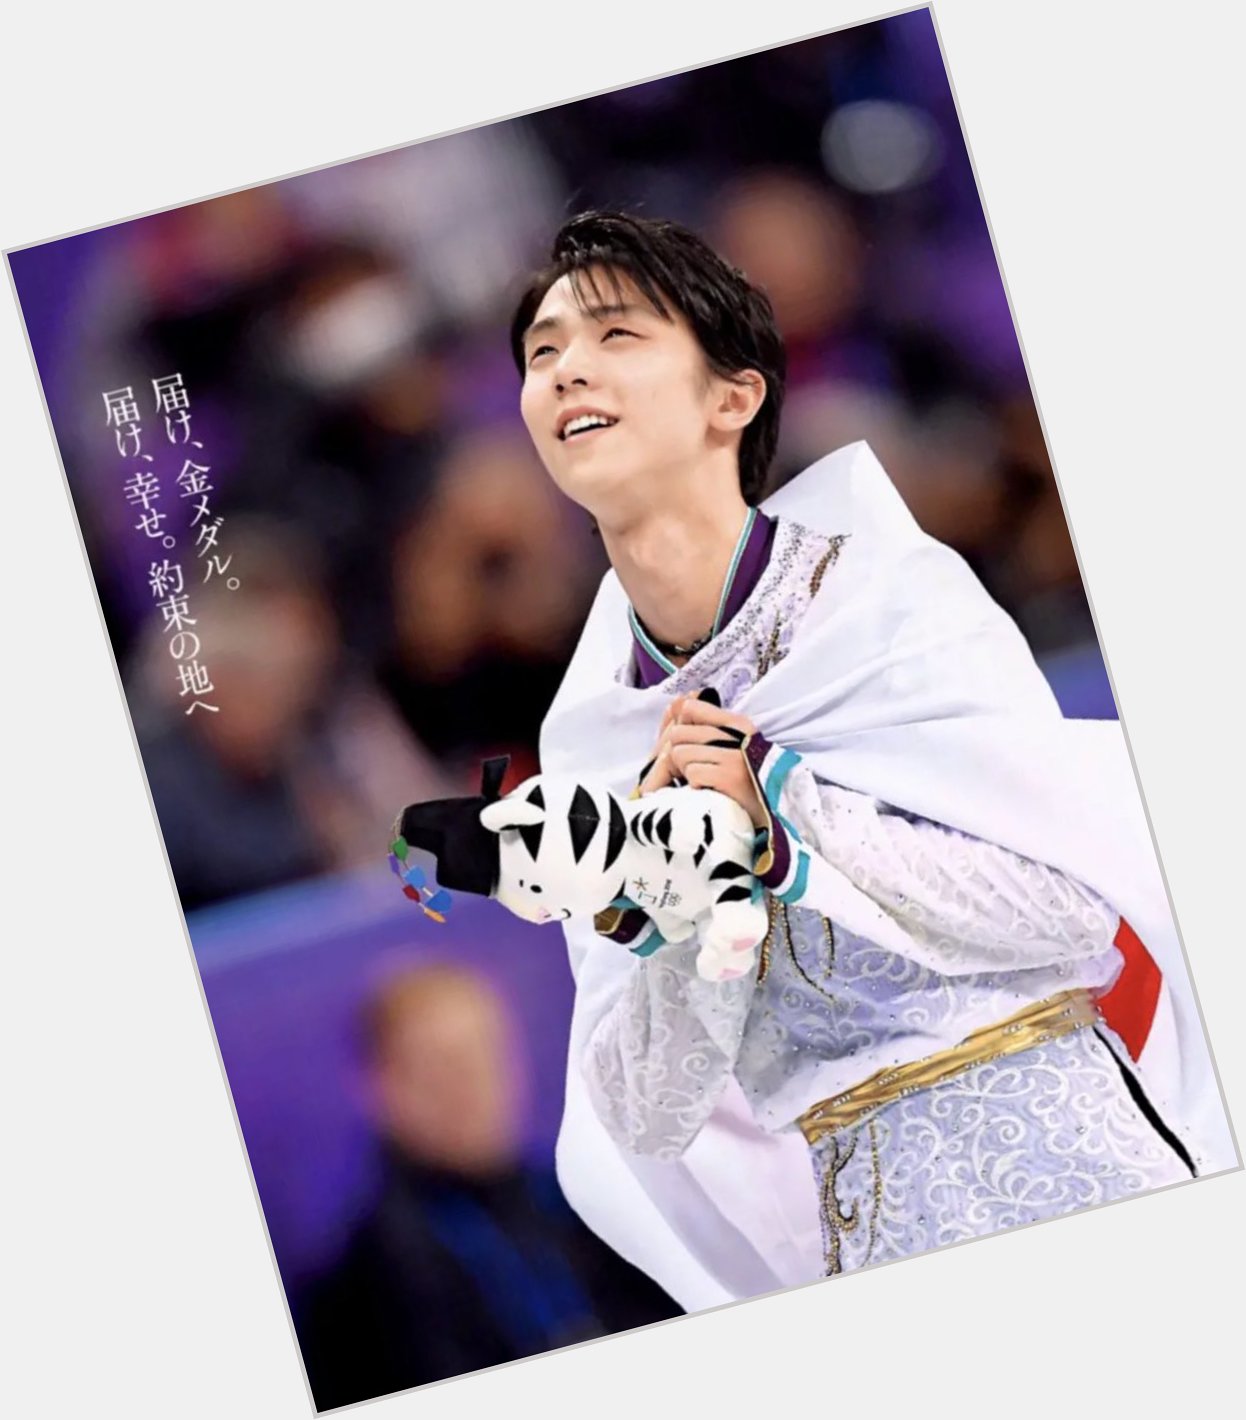 Anw, Happy Birthday to the wonderful Yuzuru Hanyu. May he recover quickly and land his dream 4A savely! 